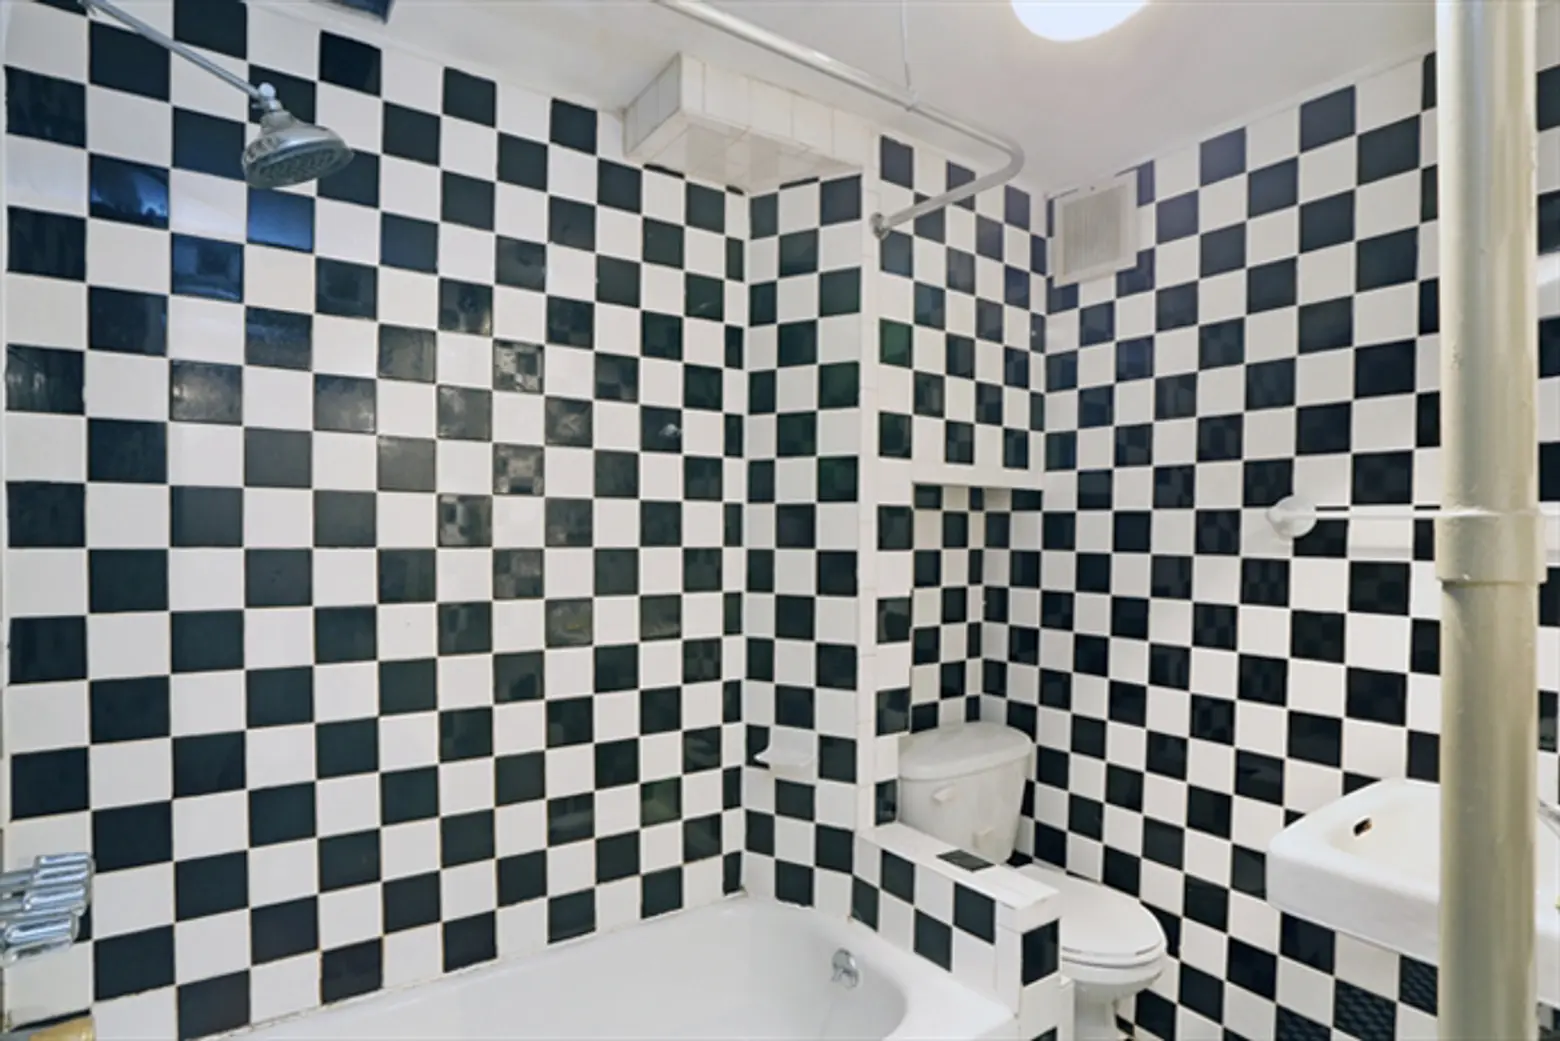 192 11th Street, original details, outdoor space, black and white checkered bathroom